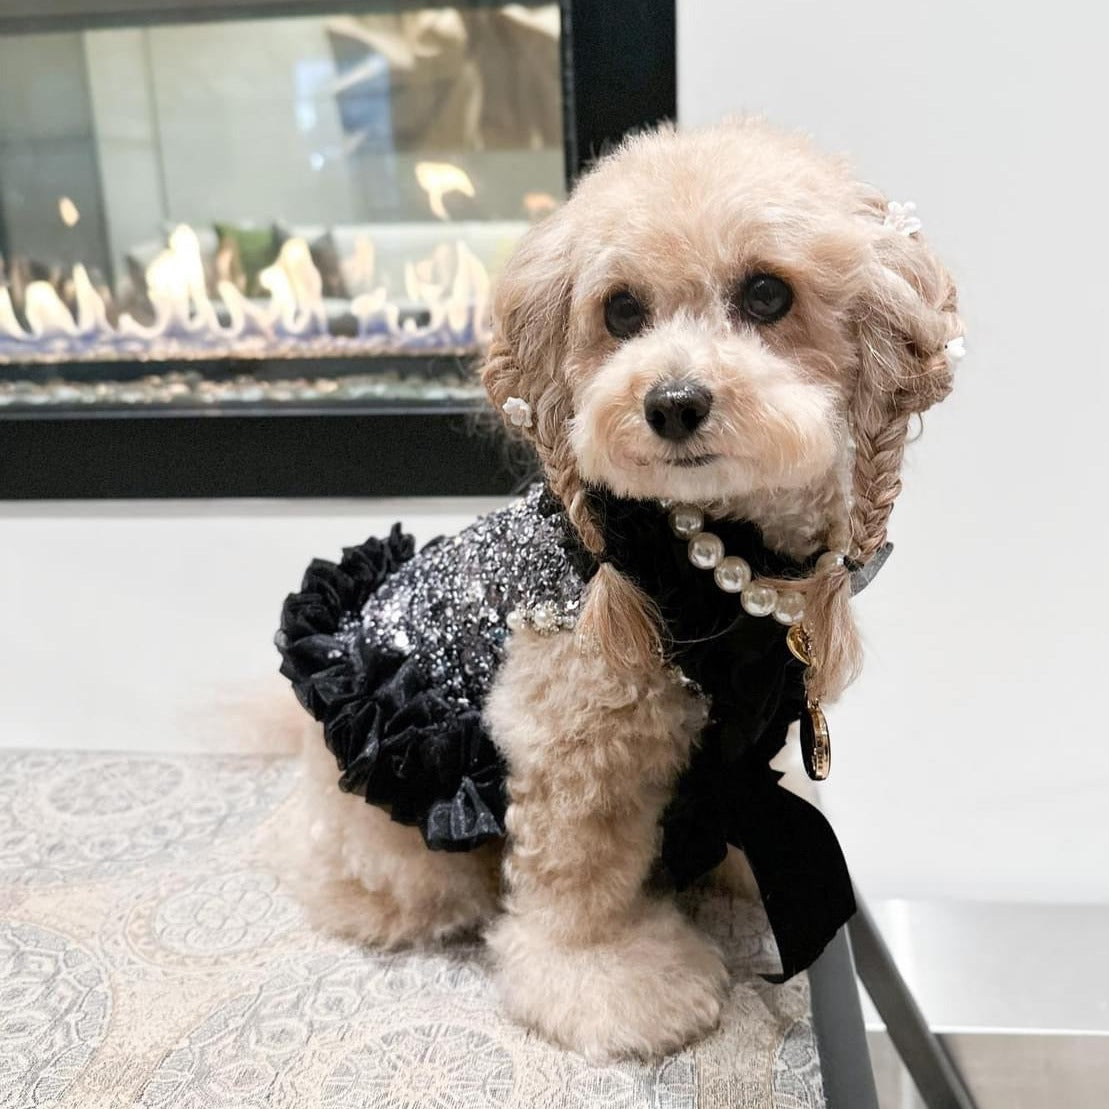 Get ready for a night out on the town with this bling dog party dress in silver and black. Custom sizing for all dog breeds,